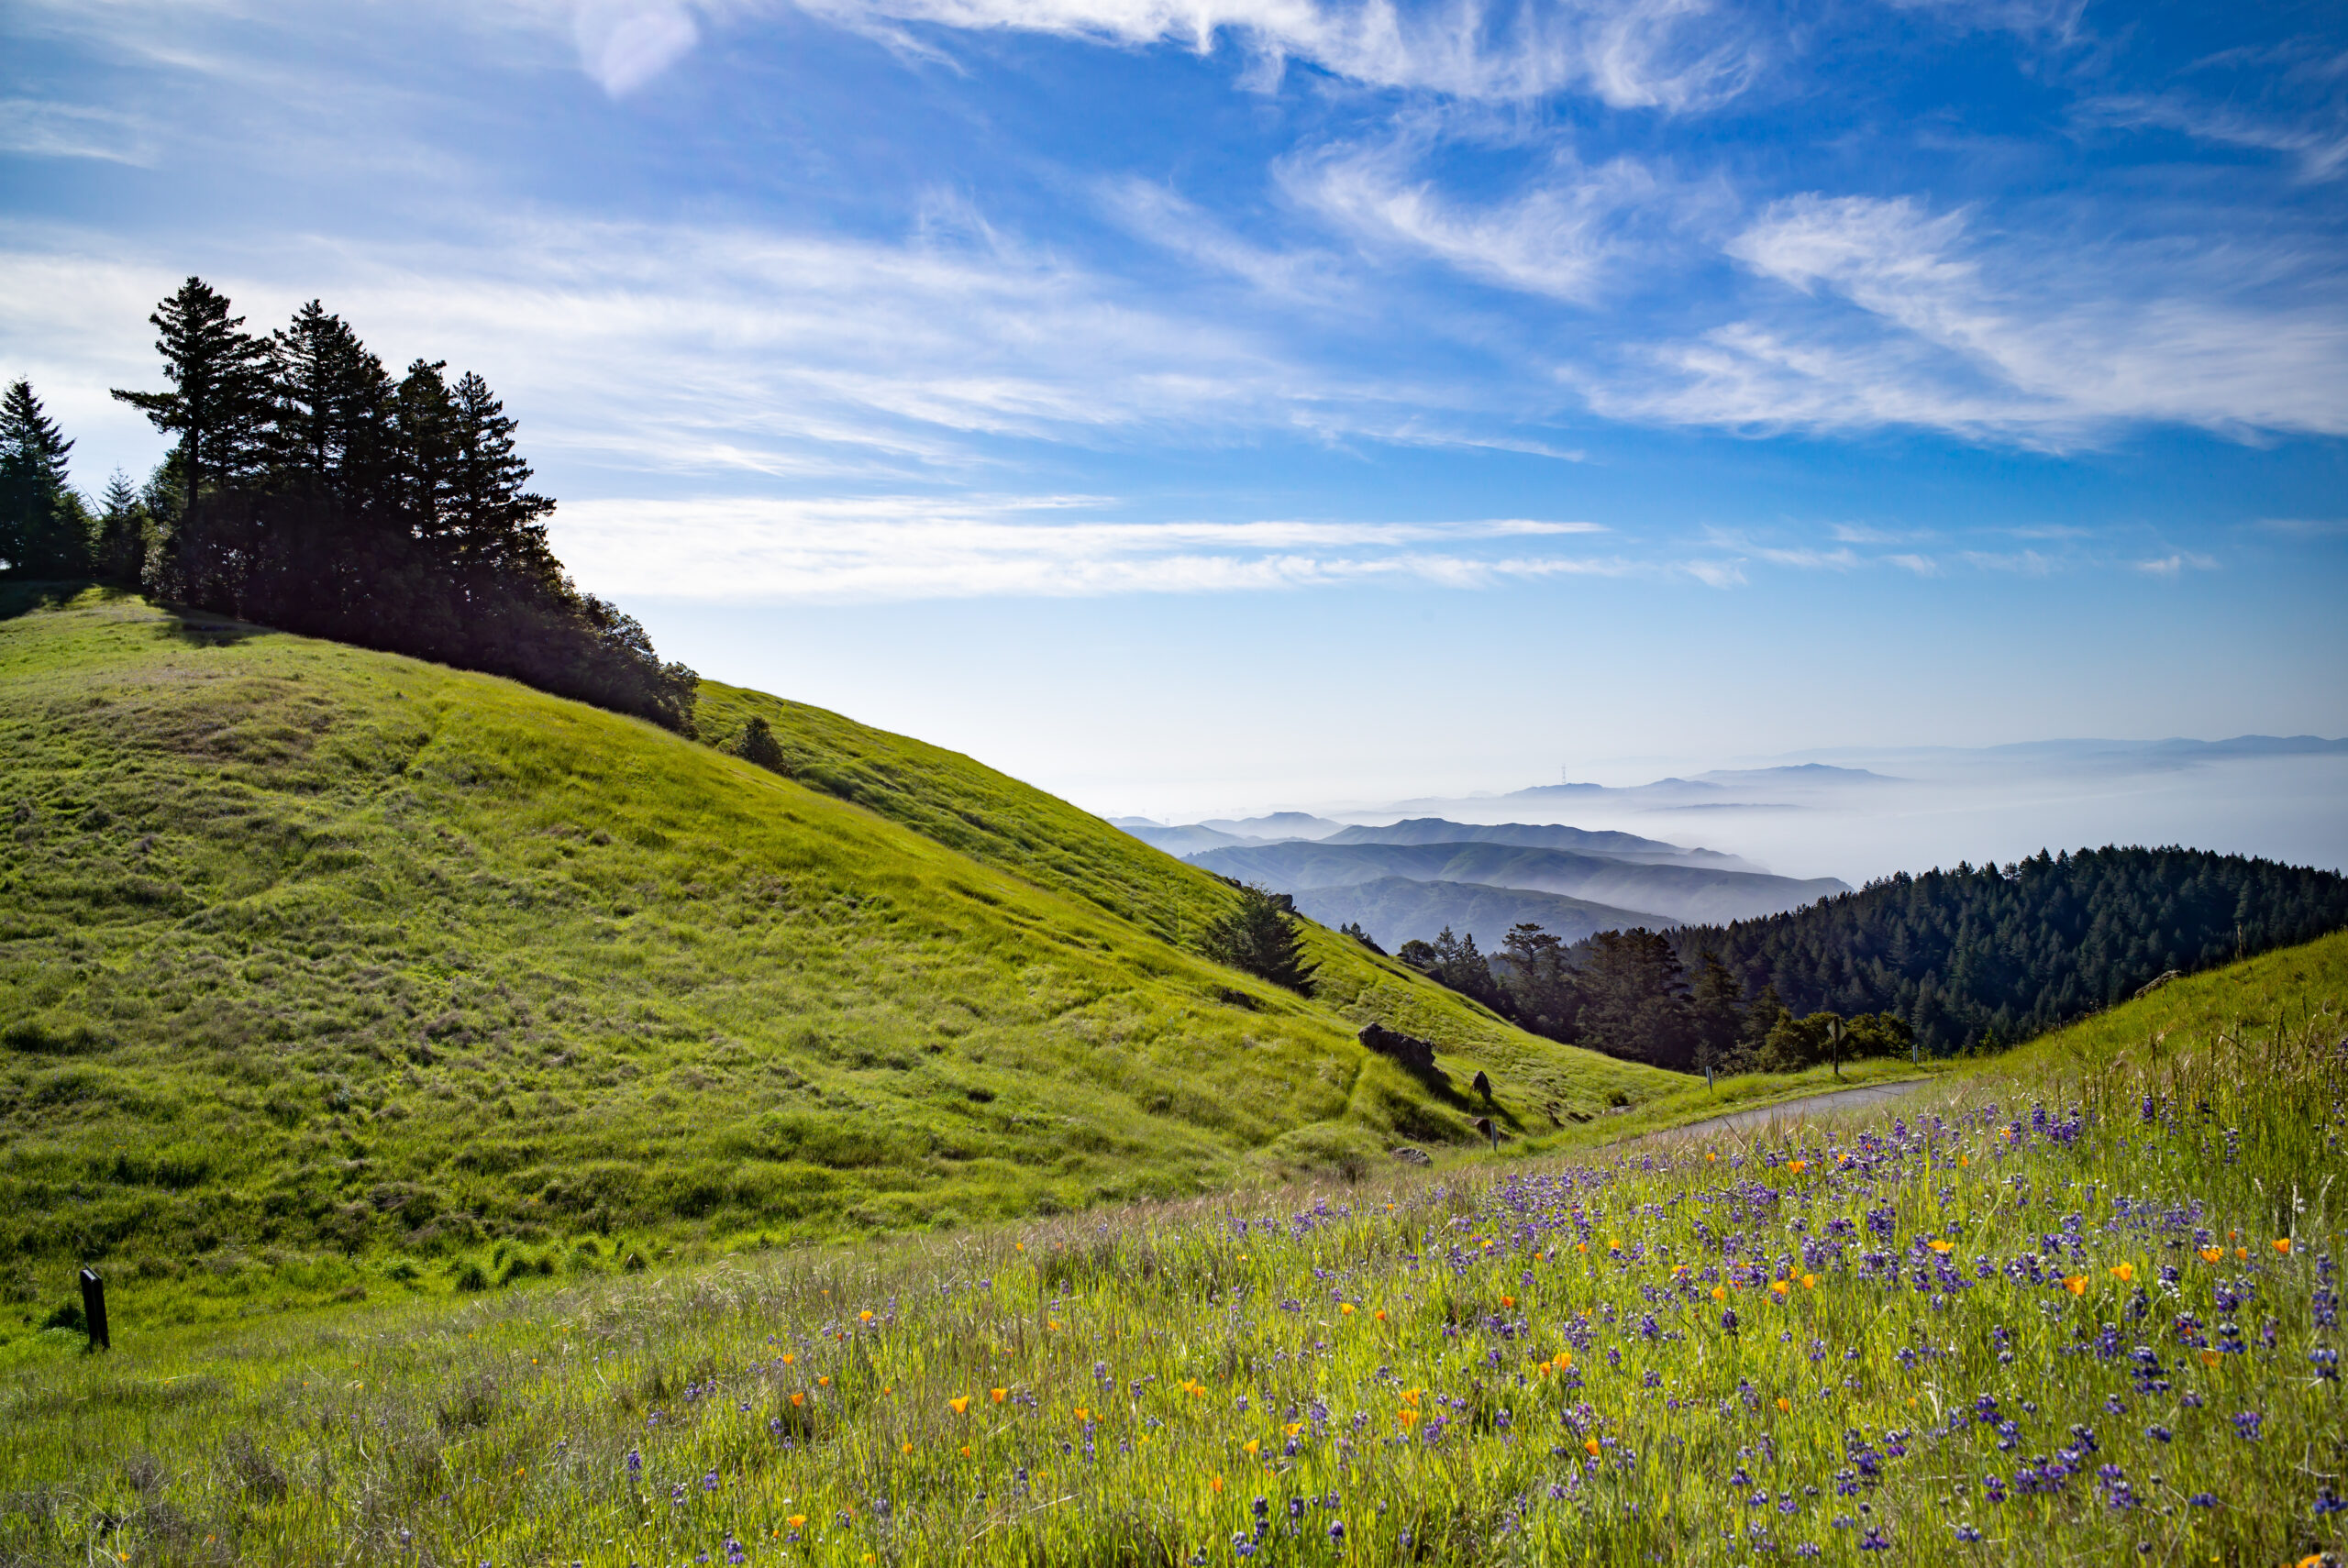 No Car? No Problem! Reach These 3 Great Bay Area Hikes on Public Transit